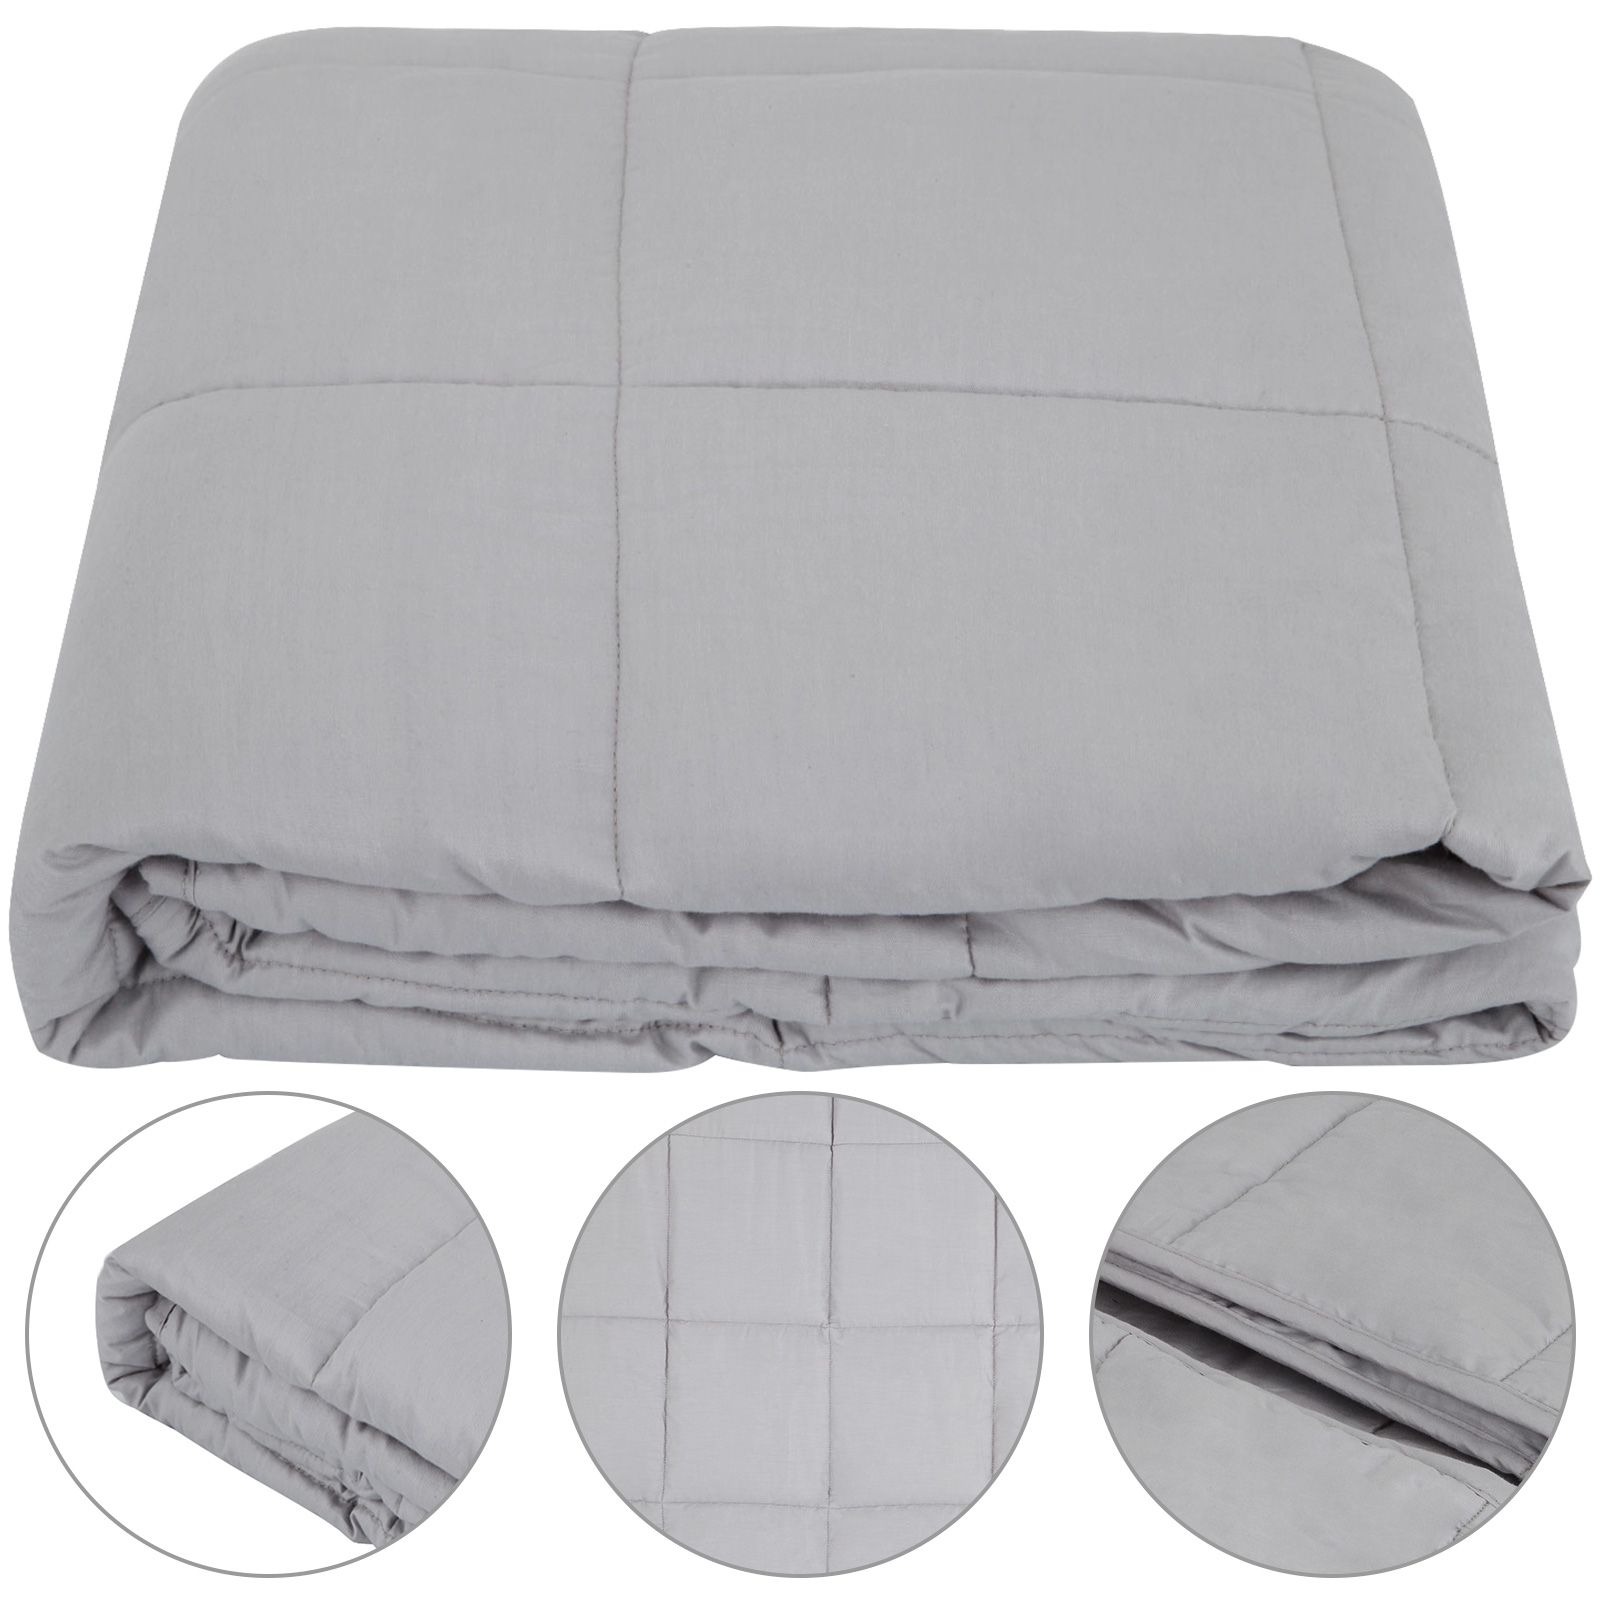 Weighted Blanket 15lbs 48x72" Reduce Stress Promote Deep Sleep For Adults Kids от Vevor Many GEOs